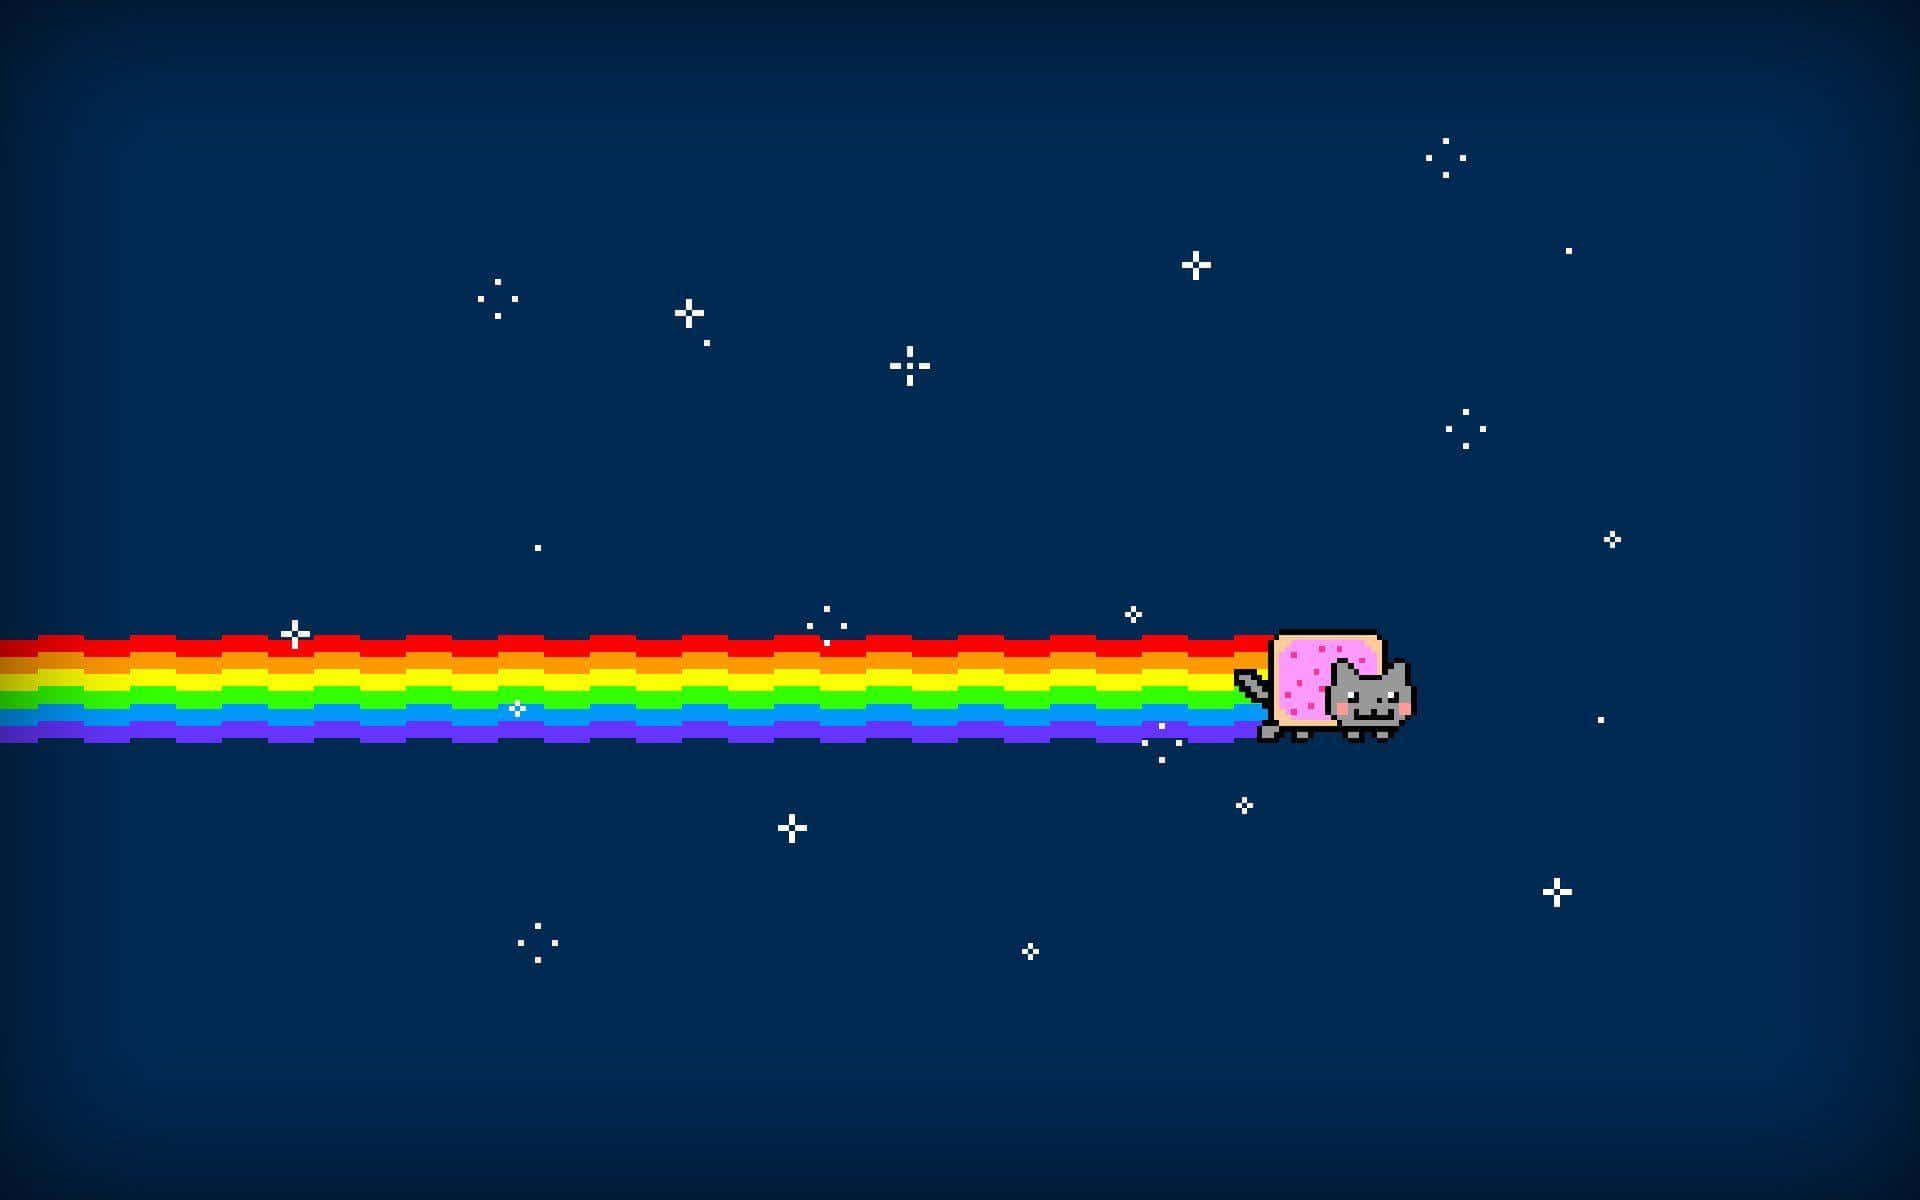 Nyan Cat soaring through space in a colorful, pixelated world.